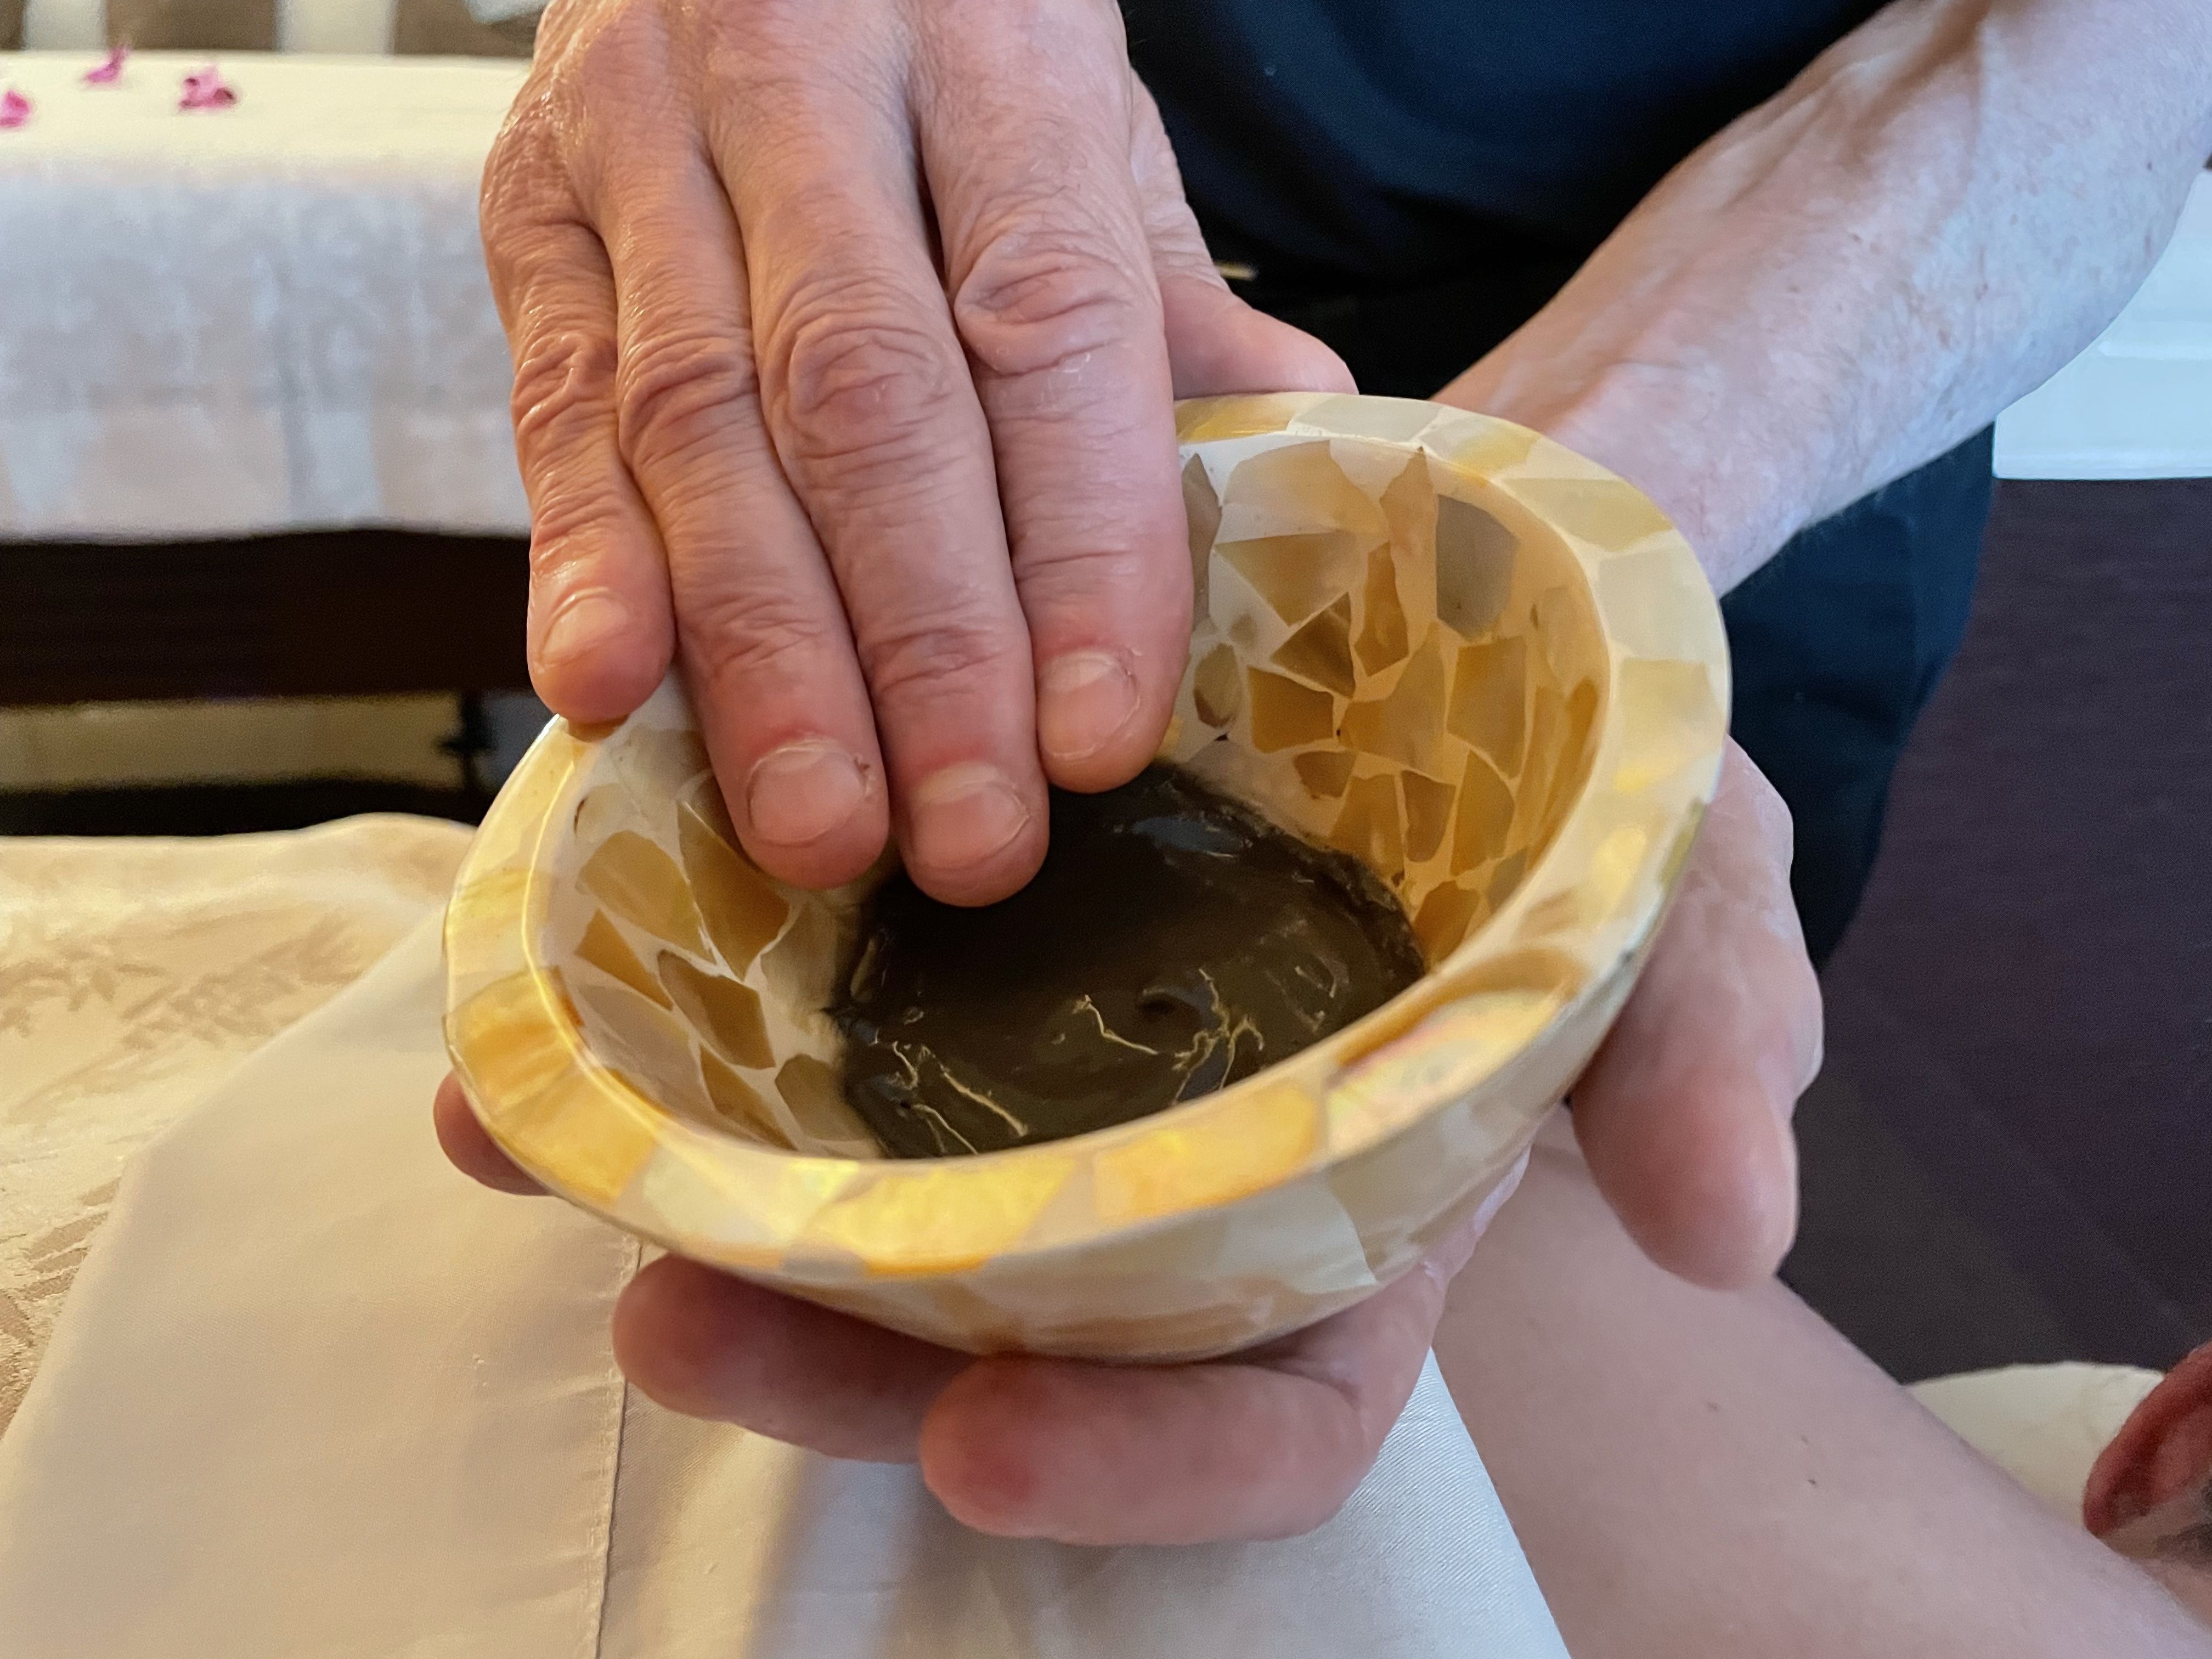 A massage therapist holds a small bowl with a mud product he is about to apply on a client's back.